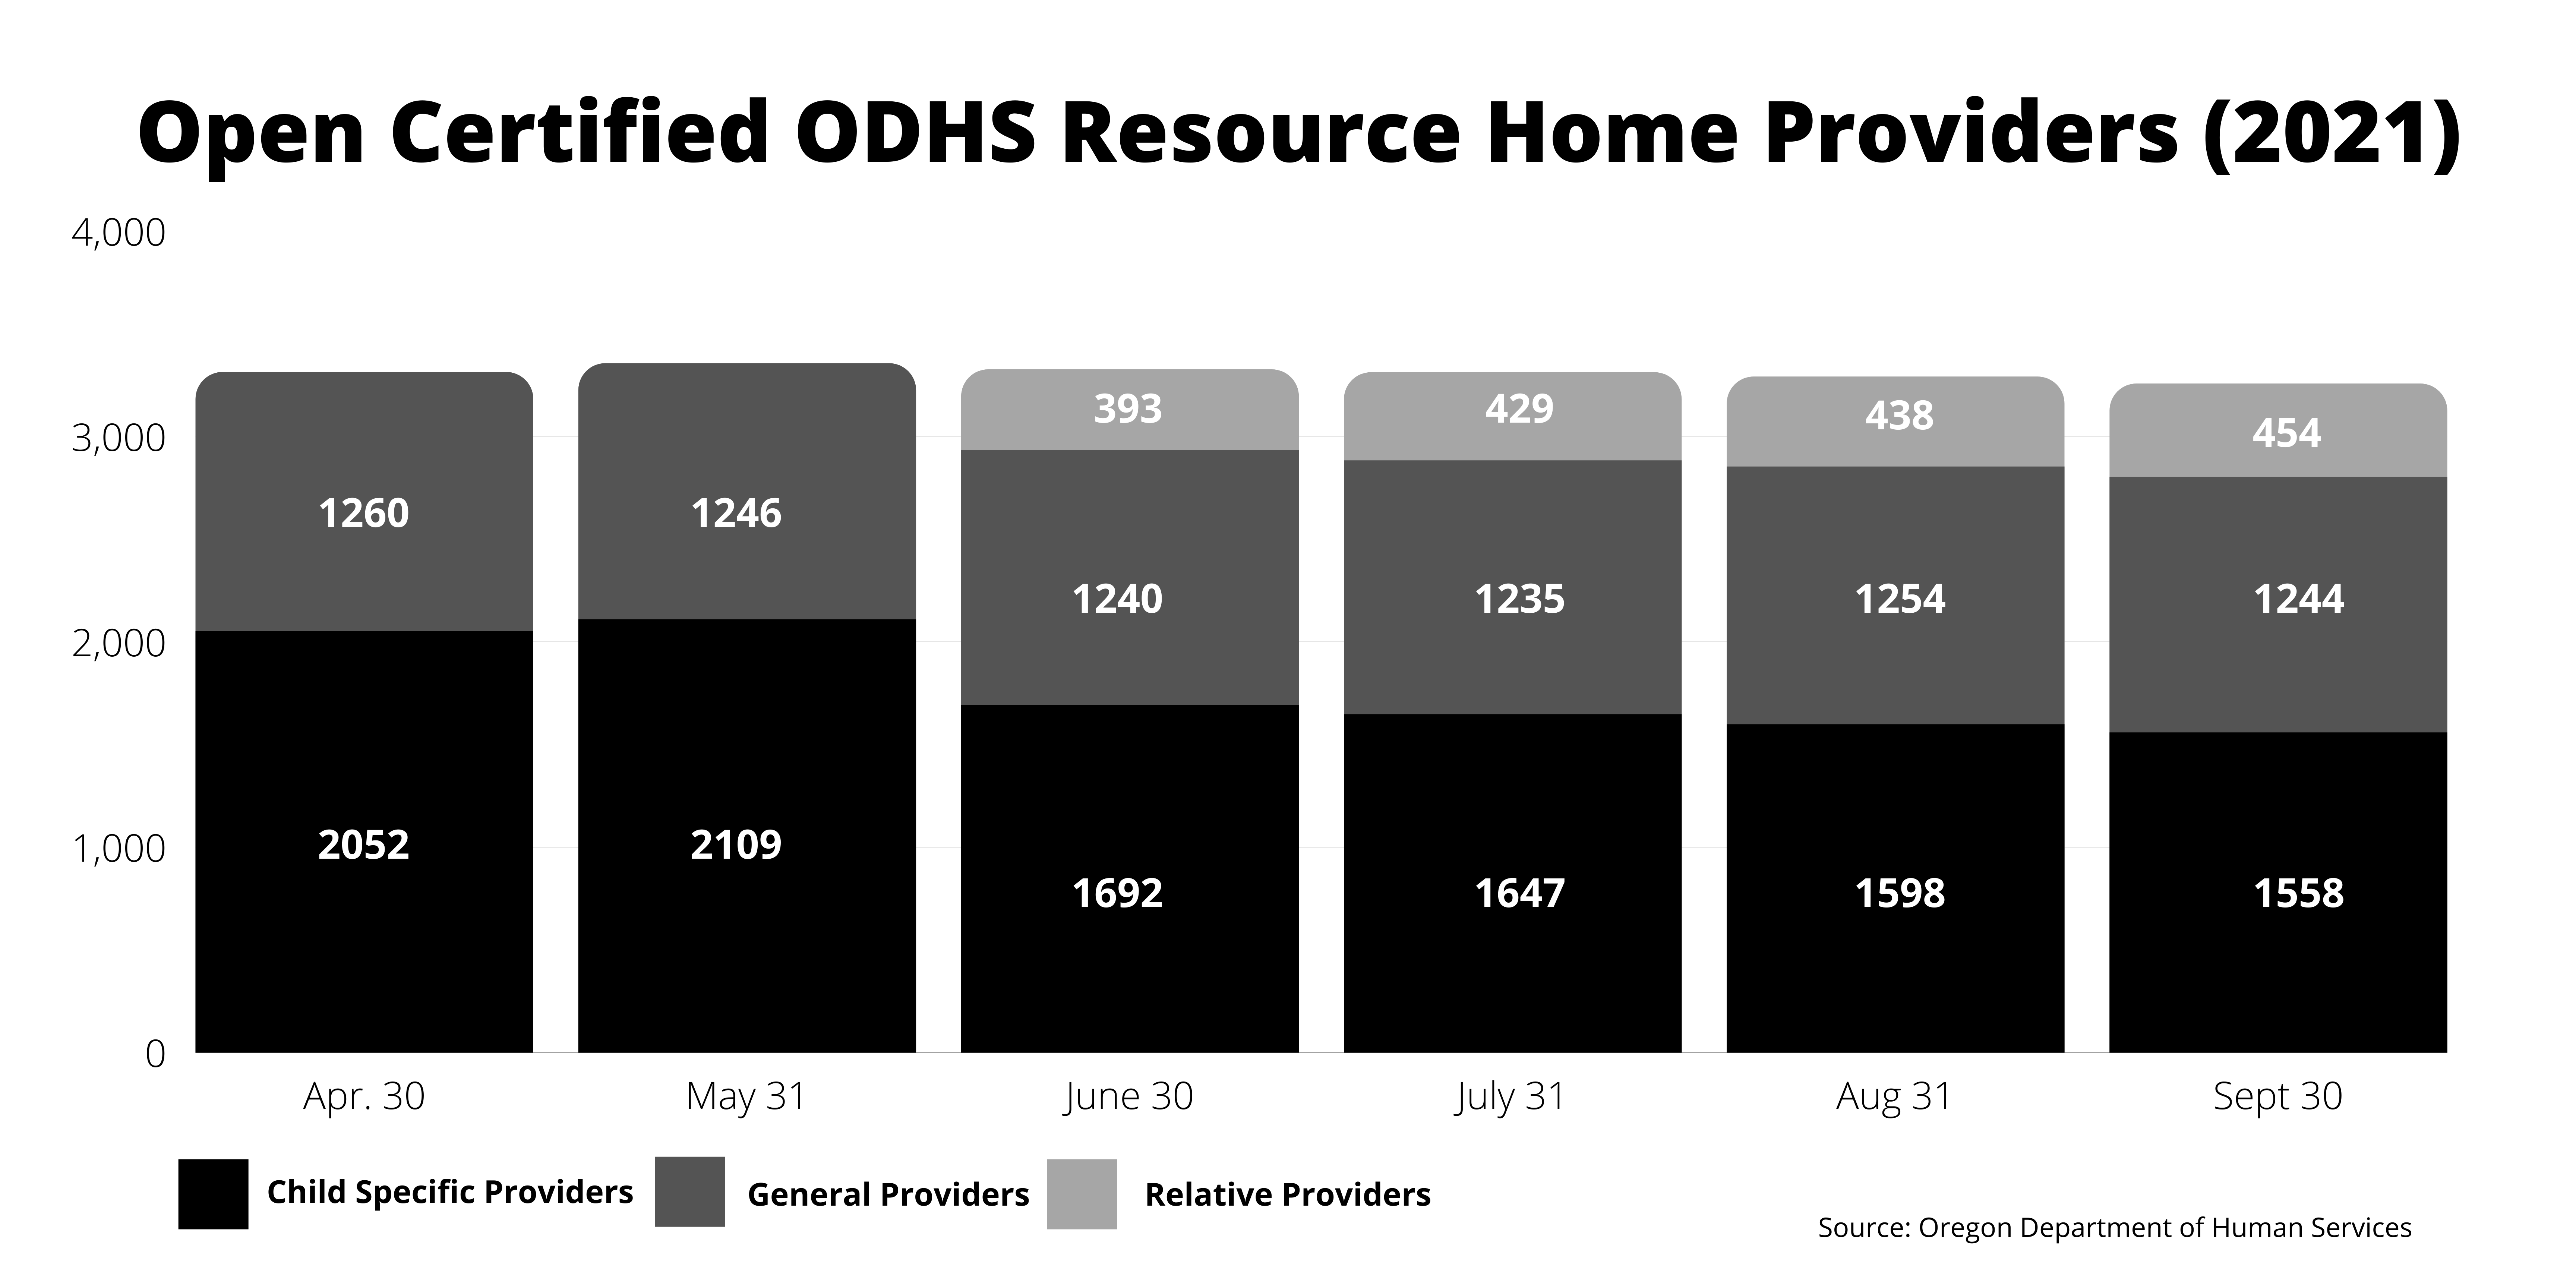 a stacked bar graph showing months April through September 2021 of Open certified ODHS resource home providers. The types of providers are categorized into child specific providers, general providers, and relative providers.